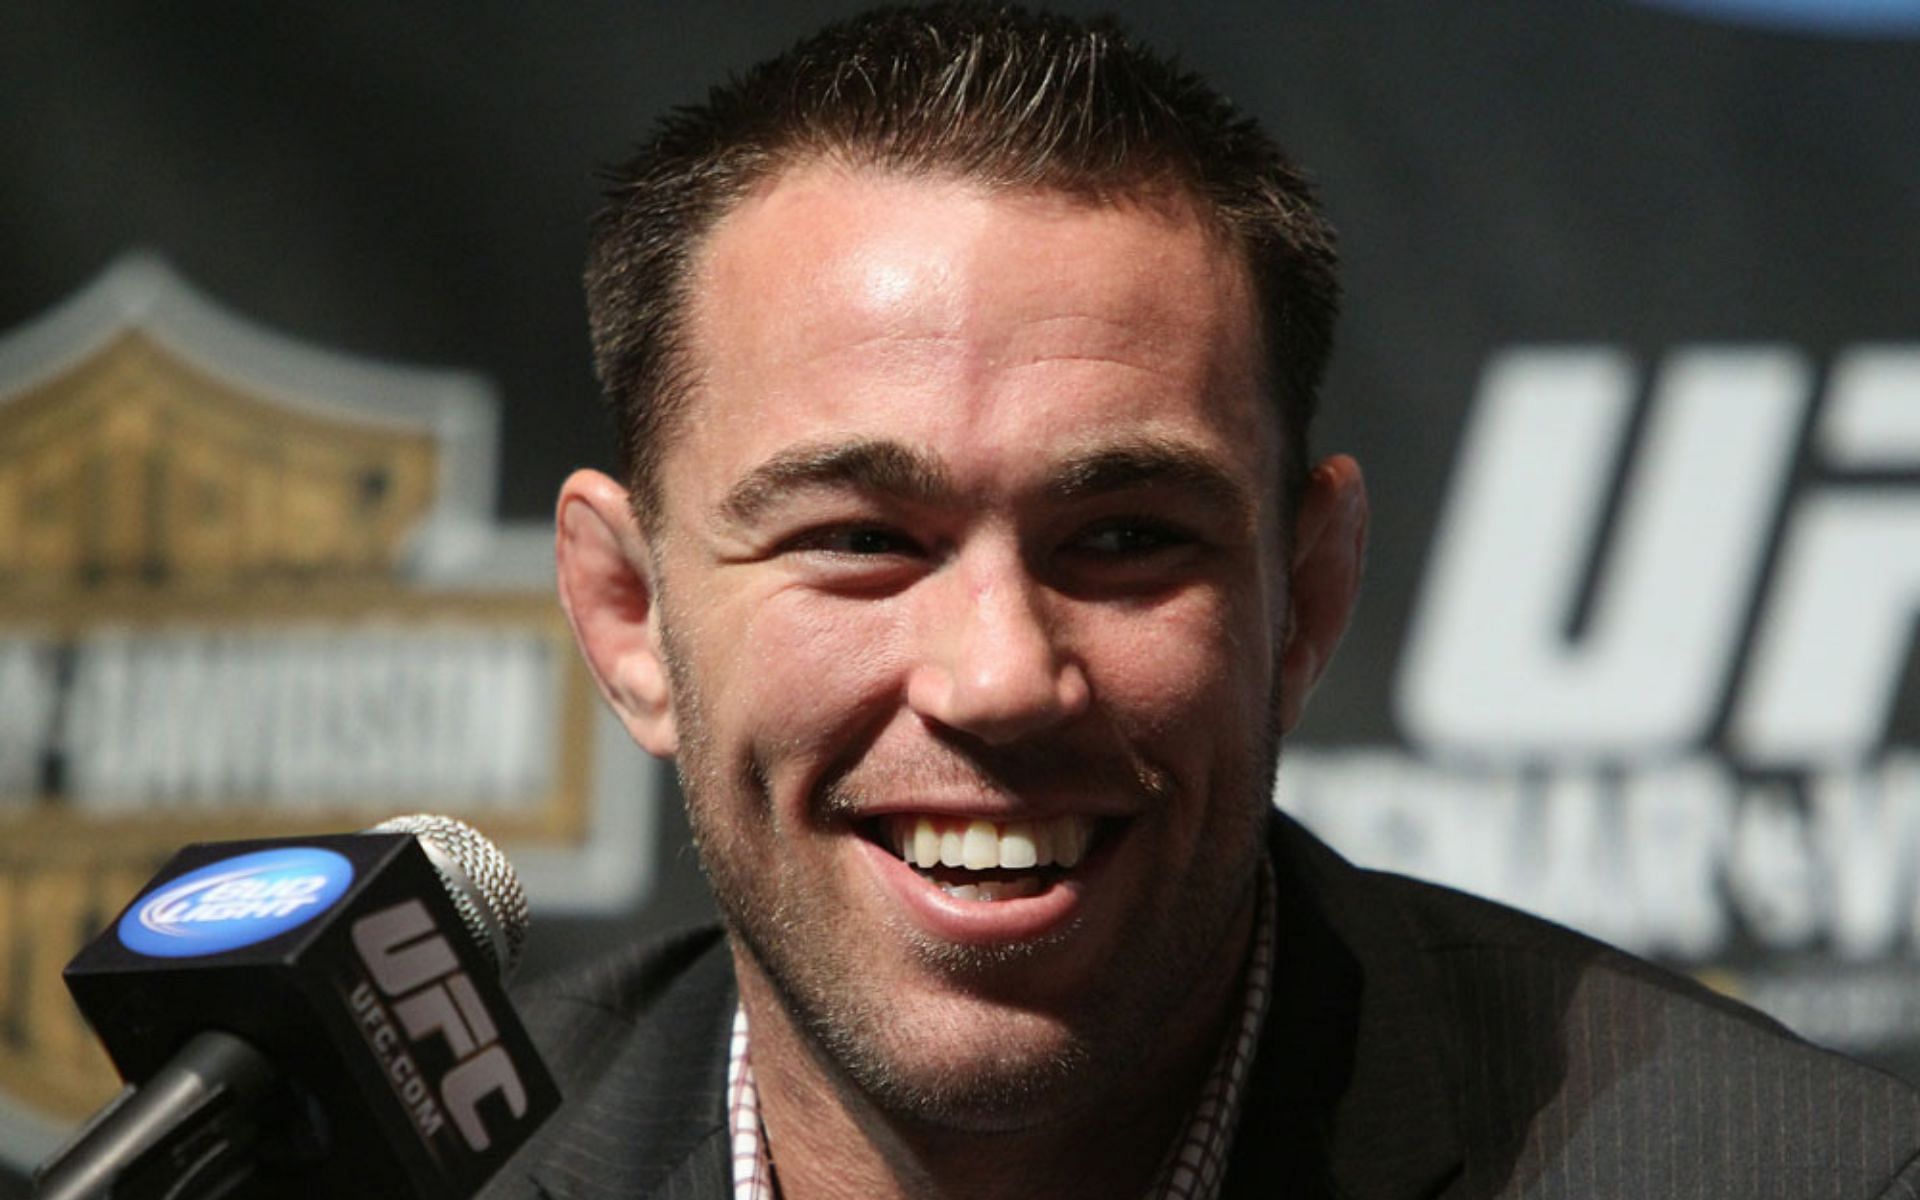 Jake Shields reacted to Aaron Bushnell